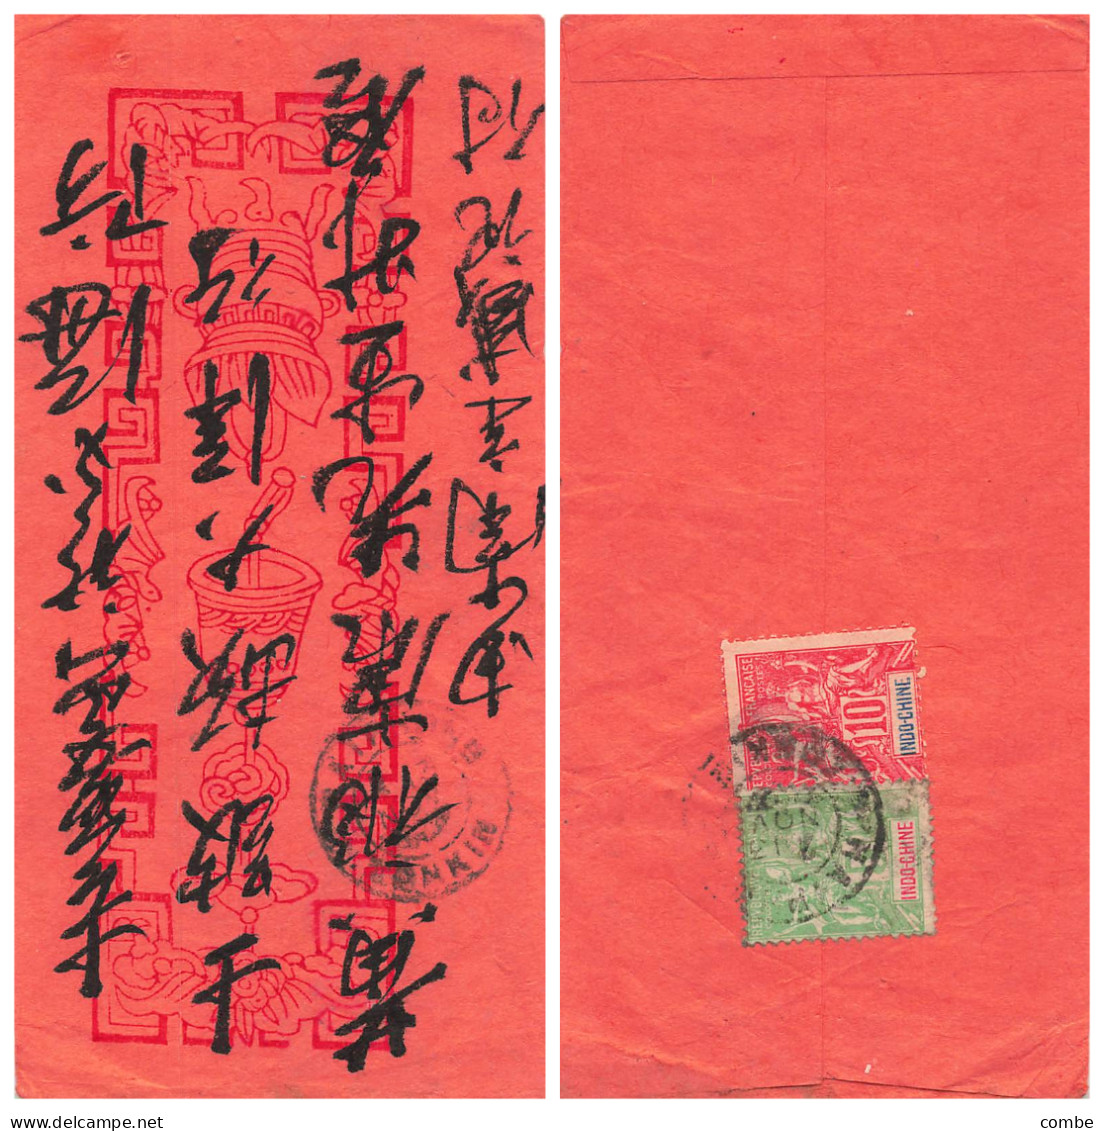 LETTRE. INDOCHINE. 13 NOV 1907. HAIPHONG TONKIN. ADRESSE EN CHINOIS. CHINE - Covers & Documents